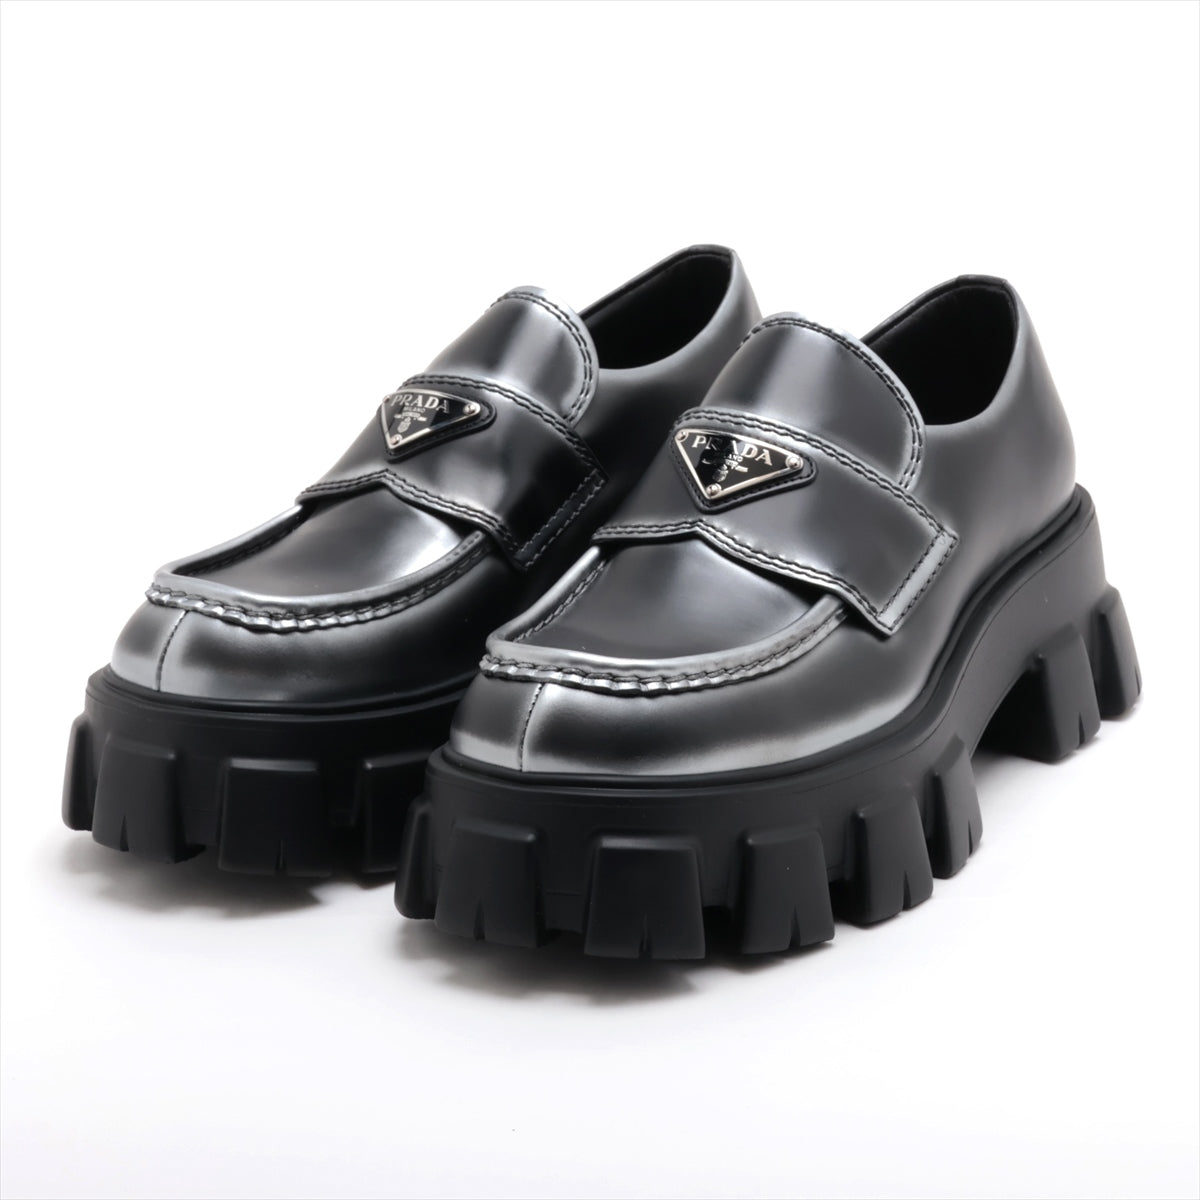 Prada Monolith Leather Loafer UK5 Men's Black 2DE129 Triangle logo Box There is a bag